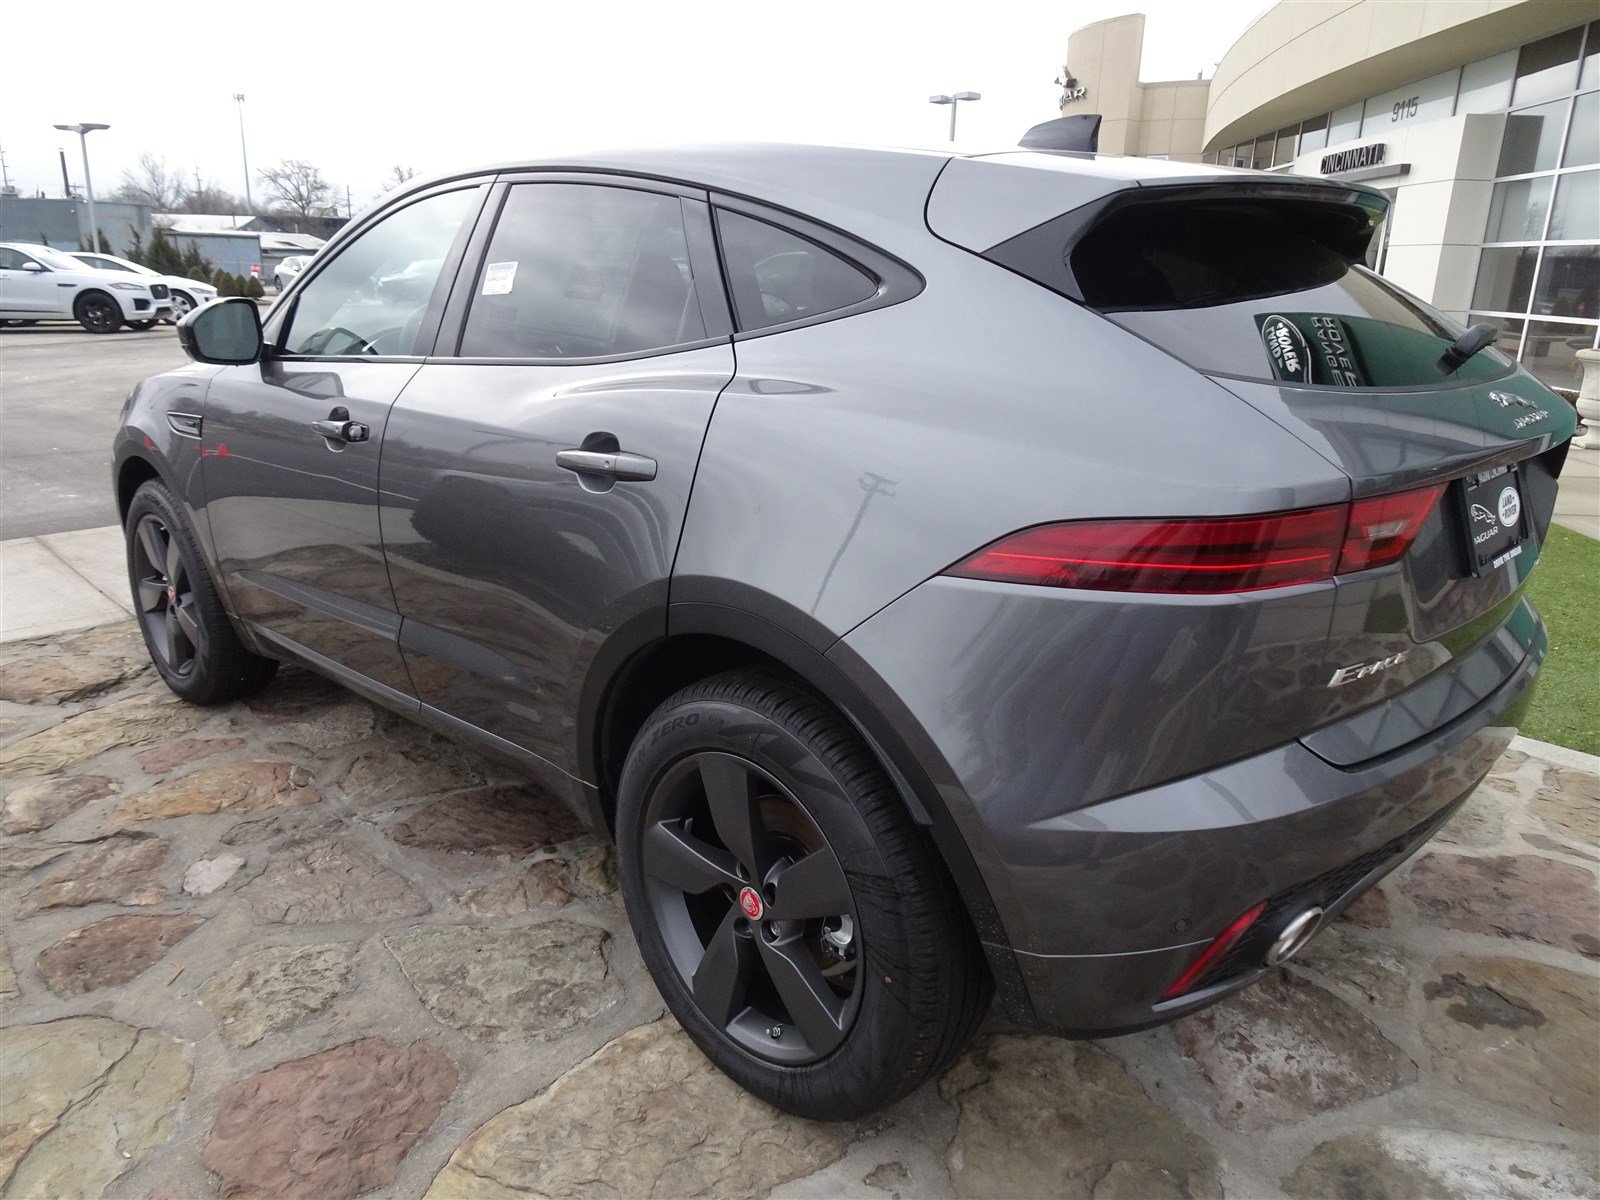 New 2020 Jaguar E-PACE Checkered Flag Edition SUV in ...